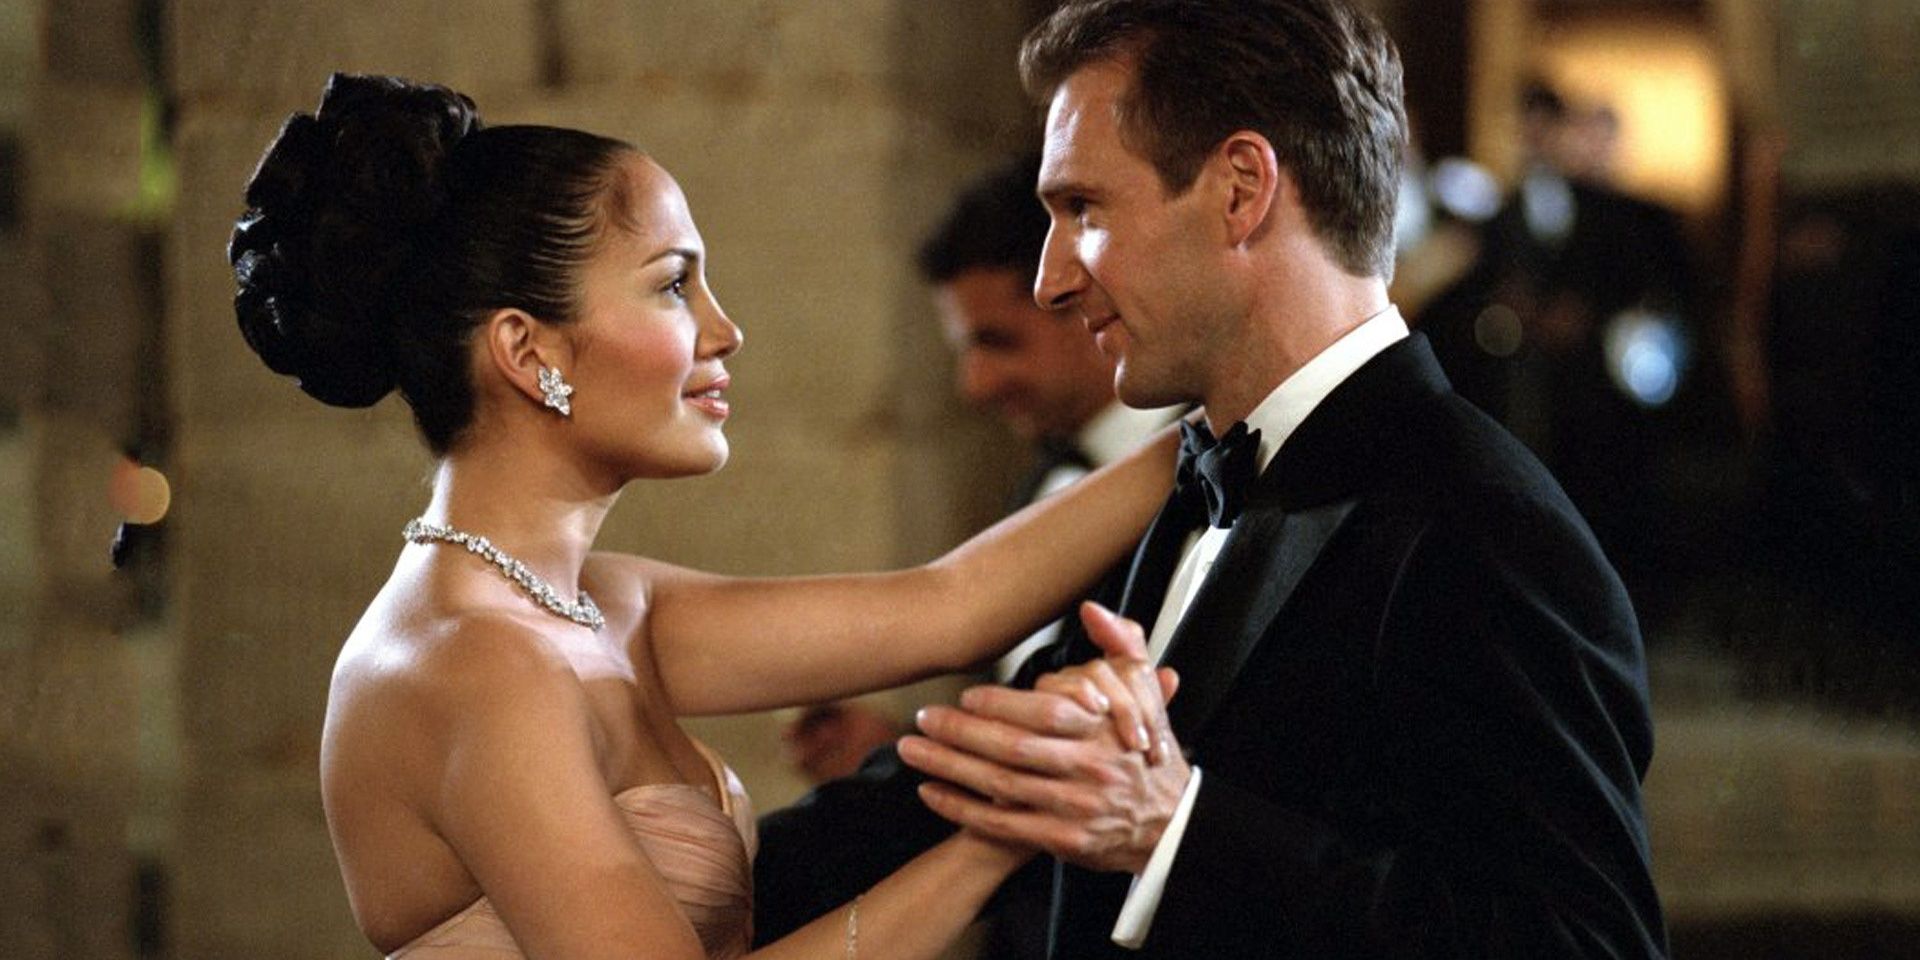 A still from Maid In Manhattan of the protagonists dancing.